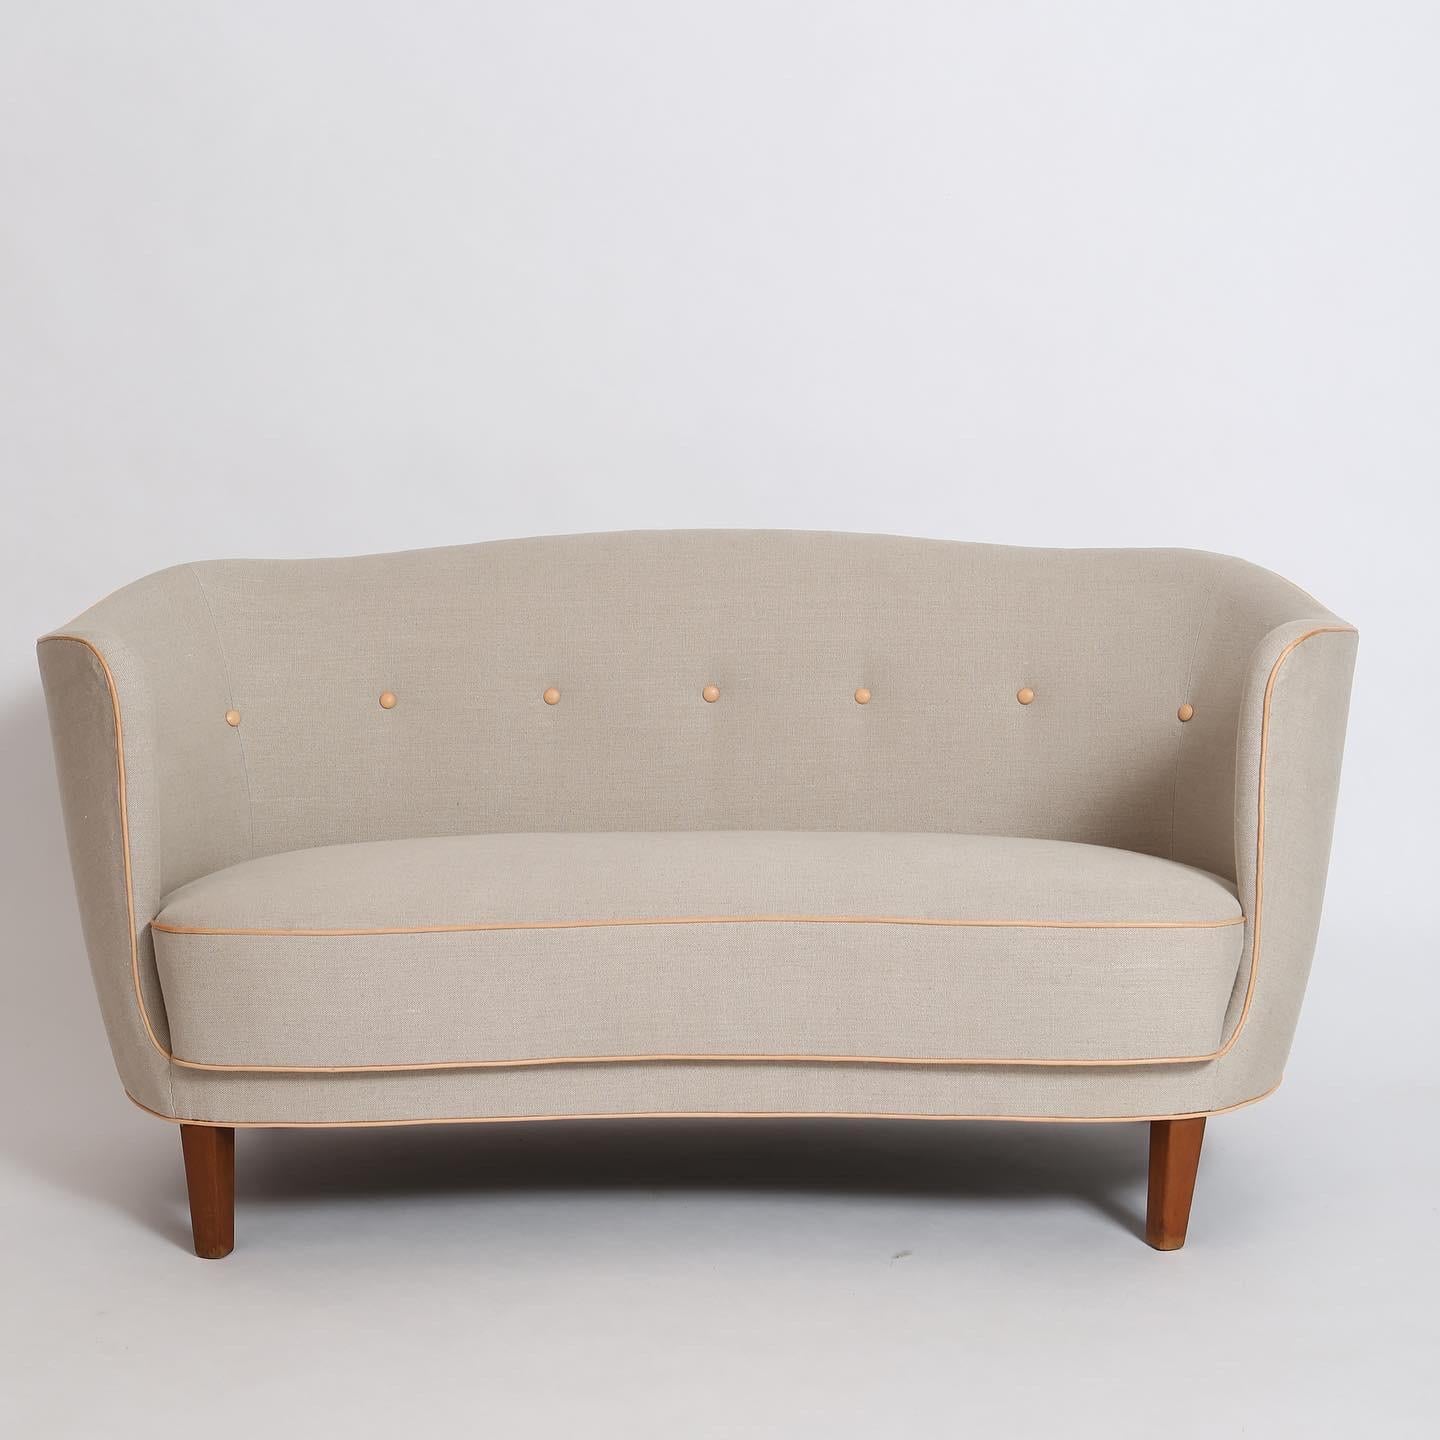 Unique form. Elegantly-curved settee was just redone in linen canvas with vegetable-tanned leather trim and buttons. Legs are solid stained beech. Reminiscent of designs by Nanna Ditzel, Finn Juhl, Tove & Edvard Kindt-Larsen and dates to the early